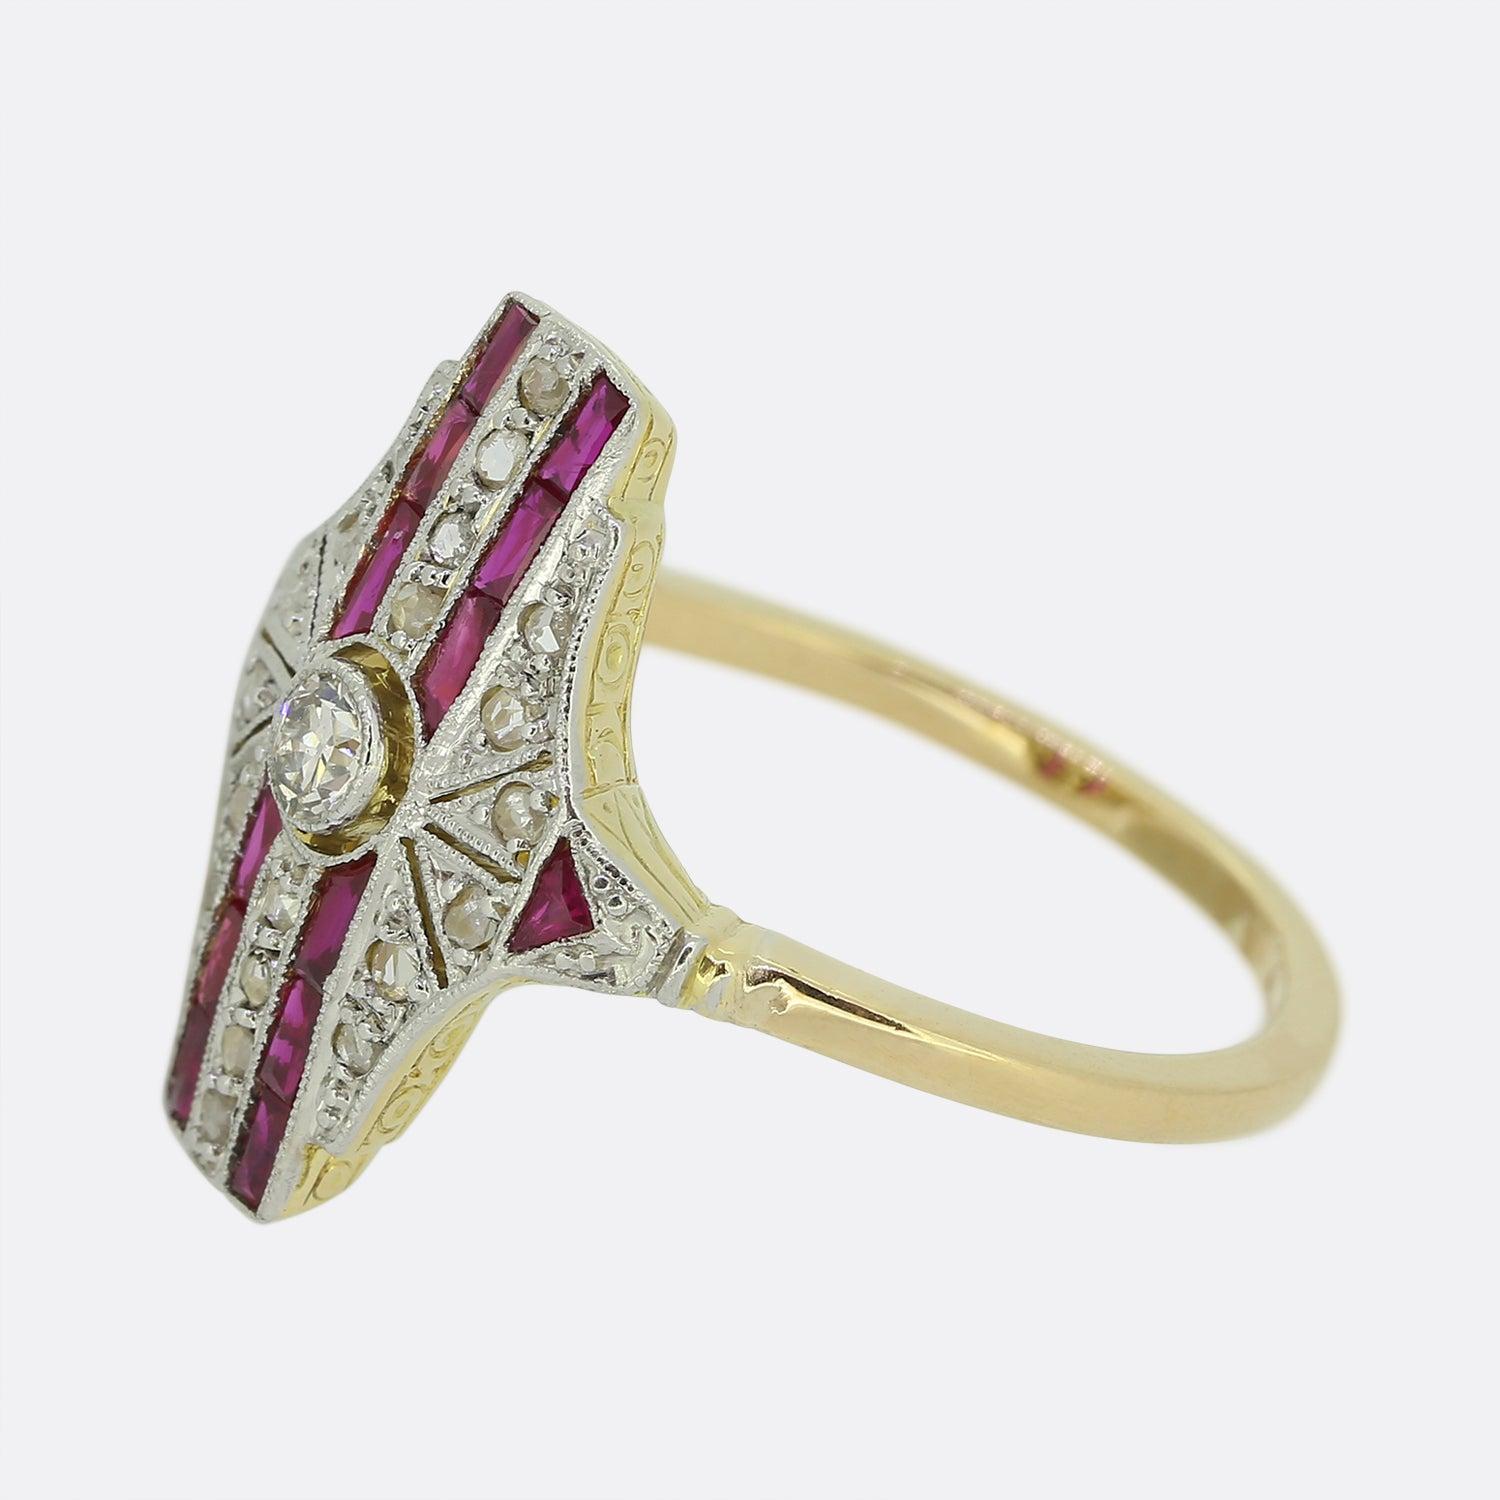 Here we have a beautifully crafted Art Deco plaque ring. A single round faceted old cut diamond sits slightly risen at the centre of the face in a fine milgrain setting. This detailing is consistent throughout the entirety of the face including the